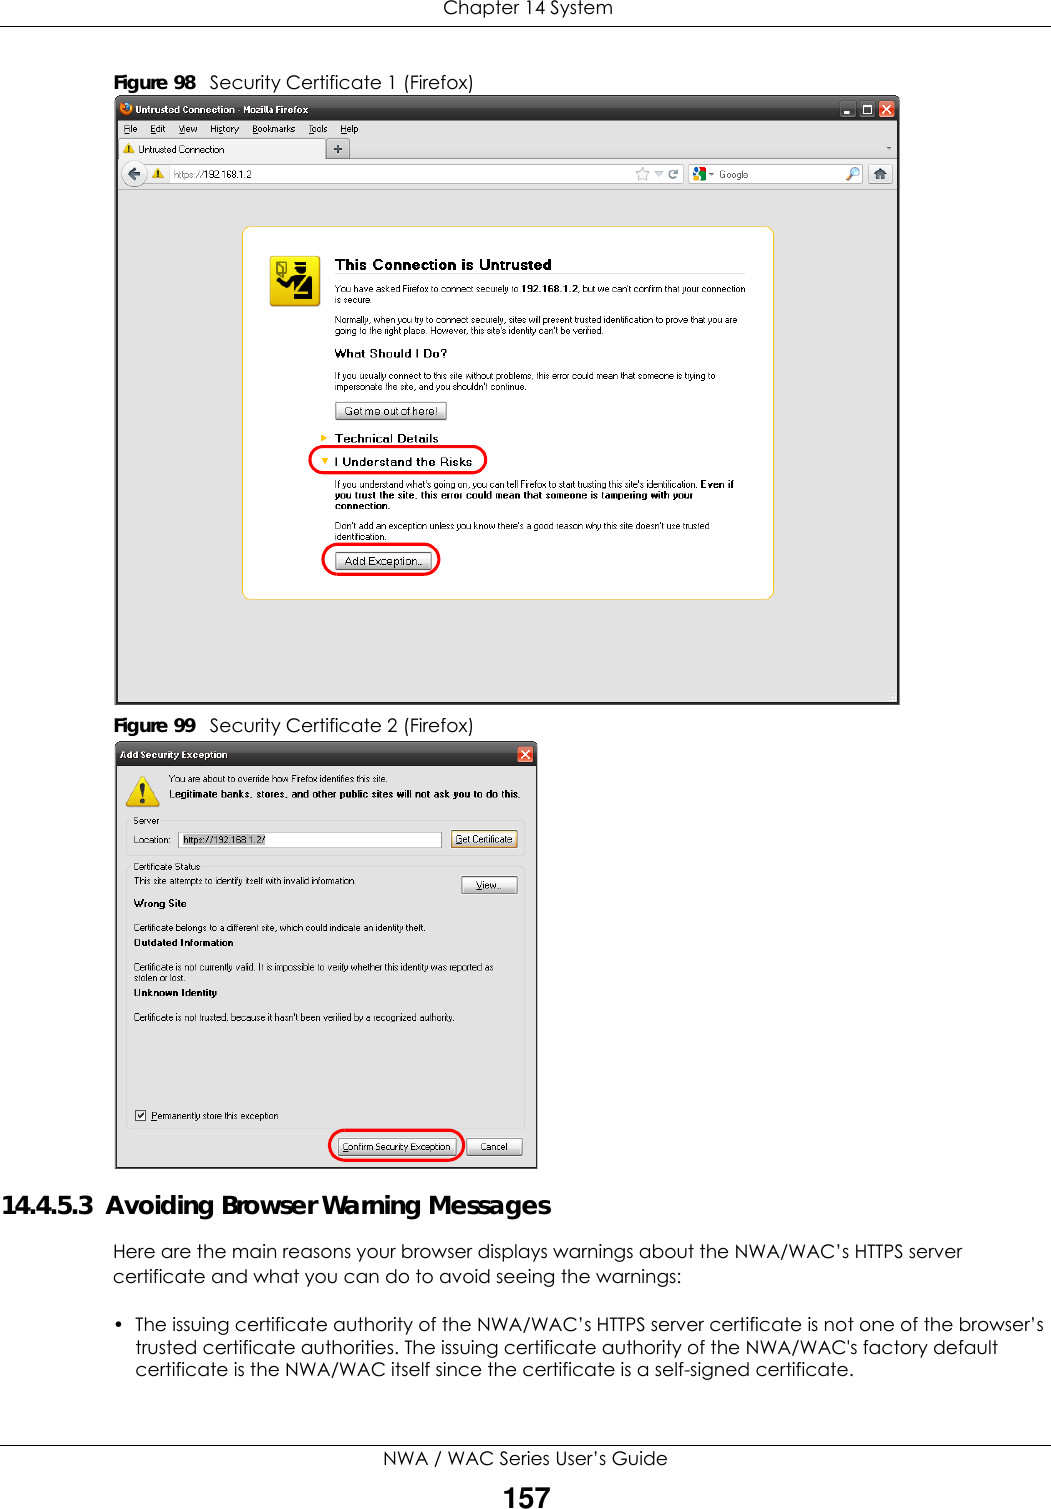  Chapter 14 SystemNWA / WAC Series User’s Guide157Figure 98   Security Certificate 1 (Firefox)Figure 99   Security Certificate 2 (Firefox)14.4.5.3  Avoiding Browser Warning MessagesHere are the main reasons your browser displays warnings about the NWA/WAC’s HTTPS server certificate and what you can do to avoid seeing the warnings:• The issuing certificate authority of the NWA/WAC’s HTTPS server certificate is not one of the browser’s trusted certificate authorities. The issuing certificate authority of the NWA/WAC&apos;s factory default certificate is the NWA/WAC itself since the certificate is a self-signed certificate. 